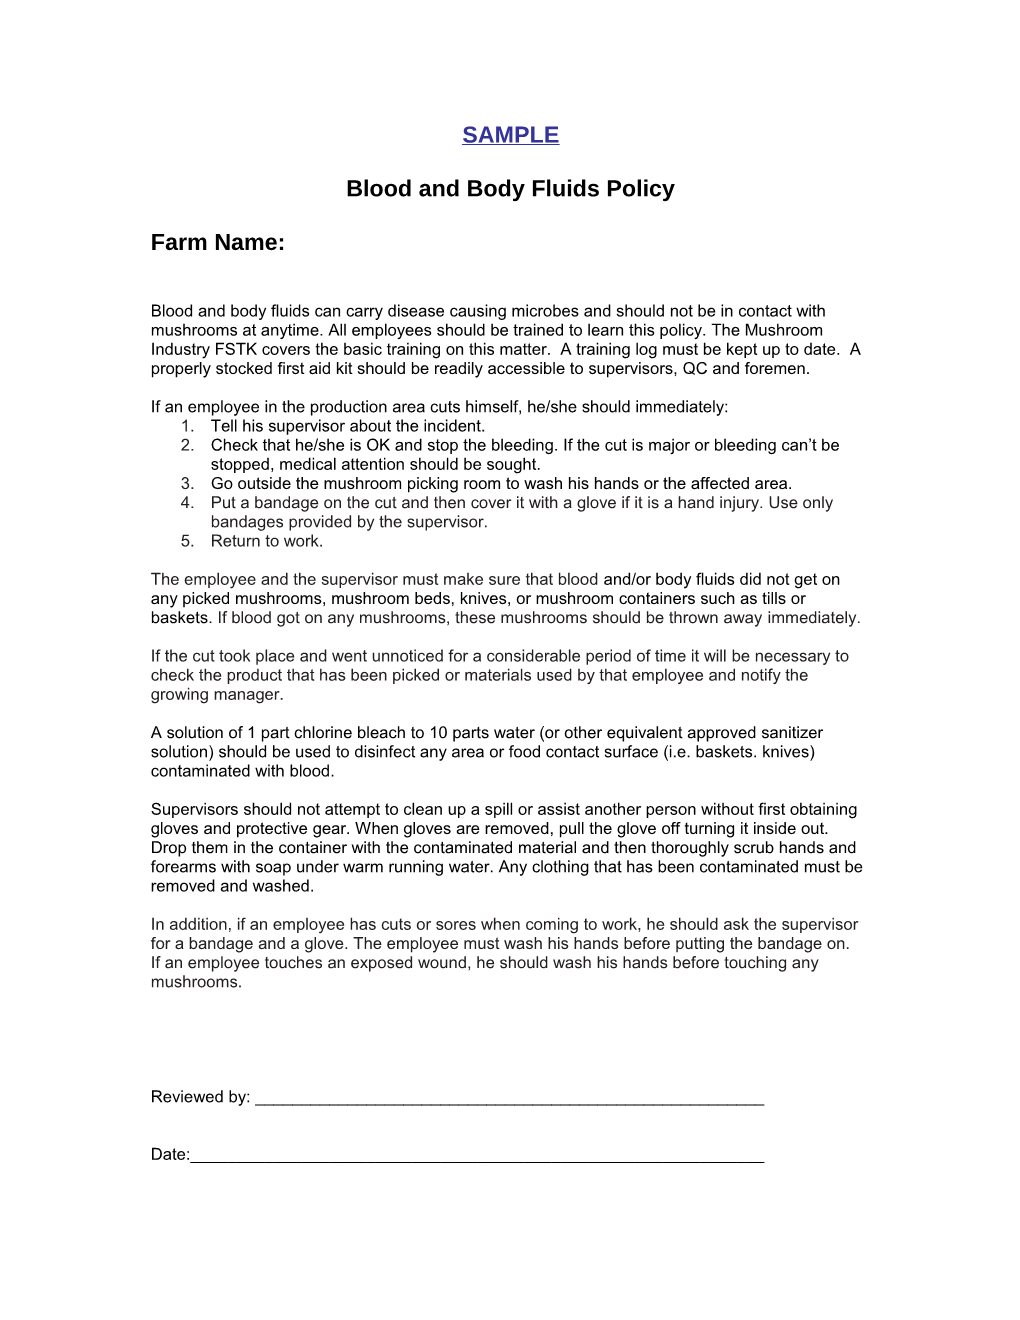 Blood and Body Fluids Policy